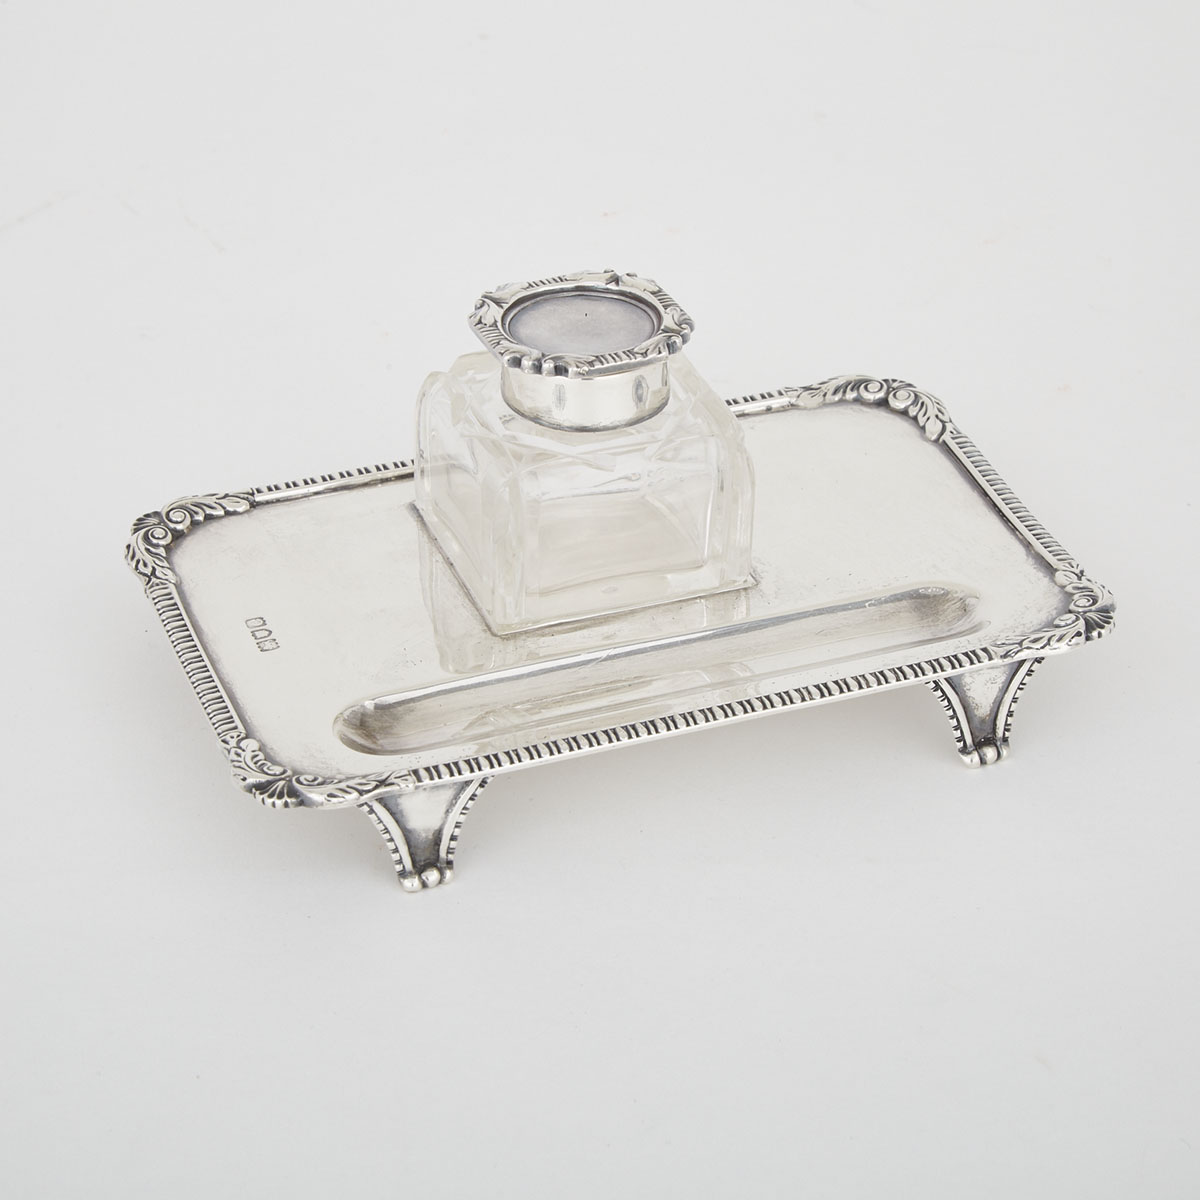 Late Victorian Silver Inkstand, London, 1900